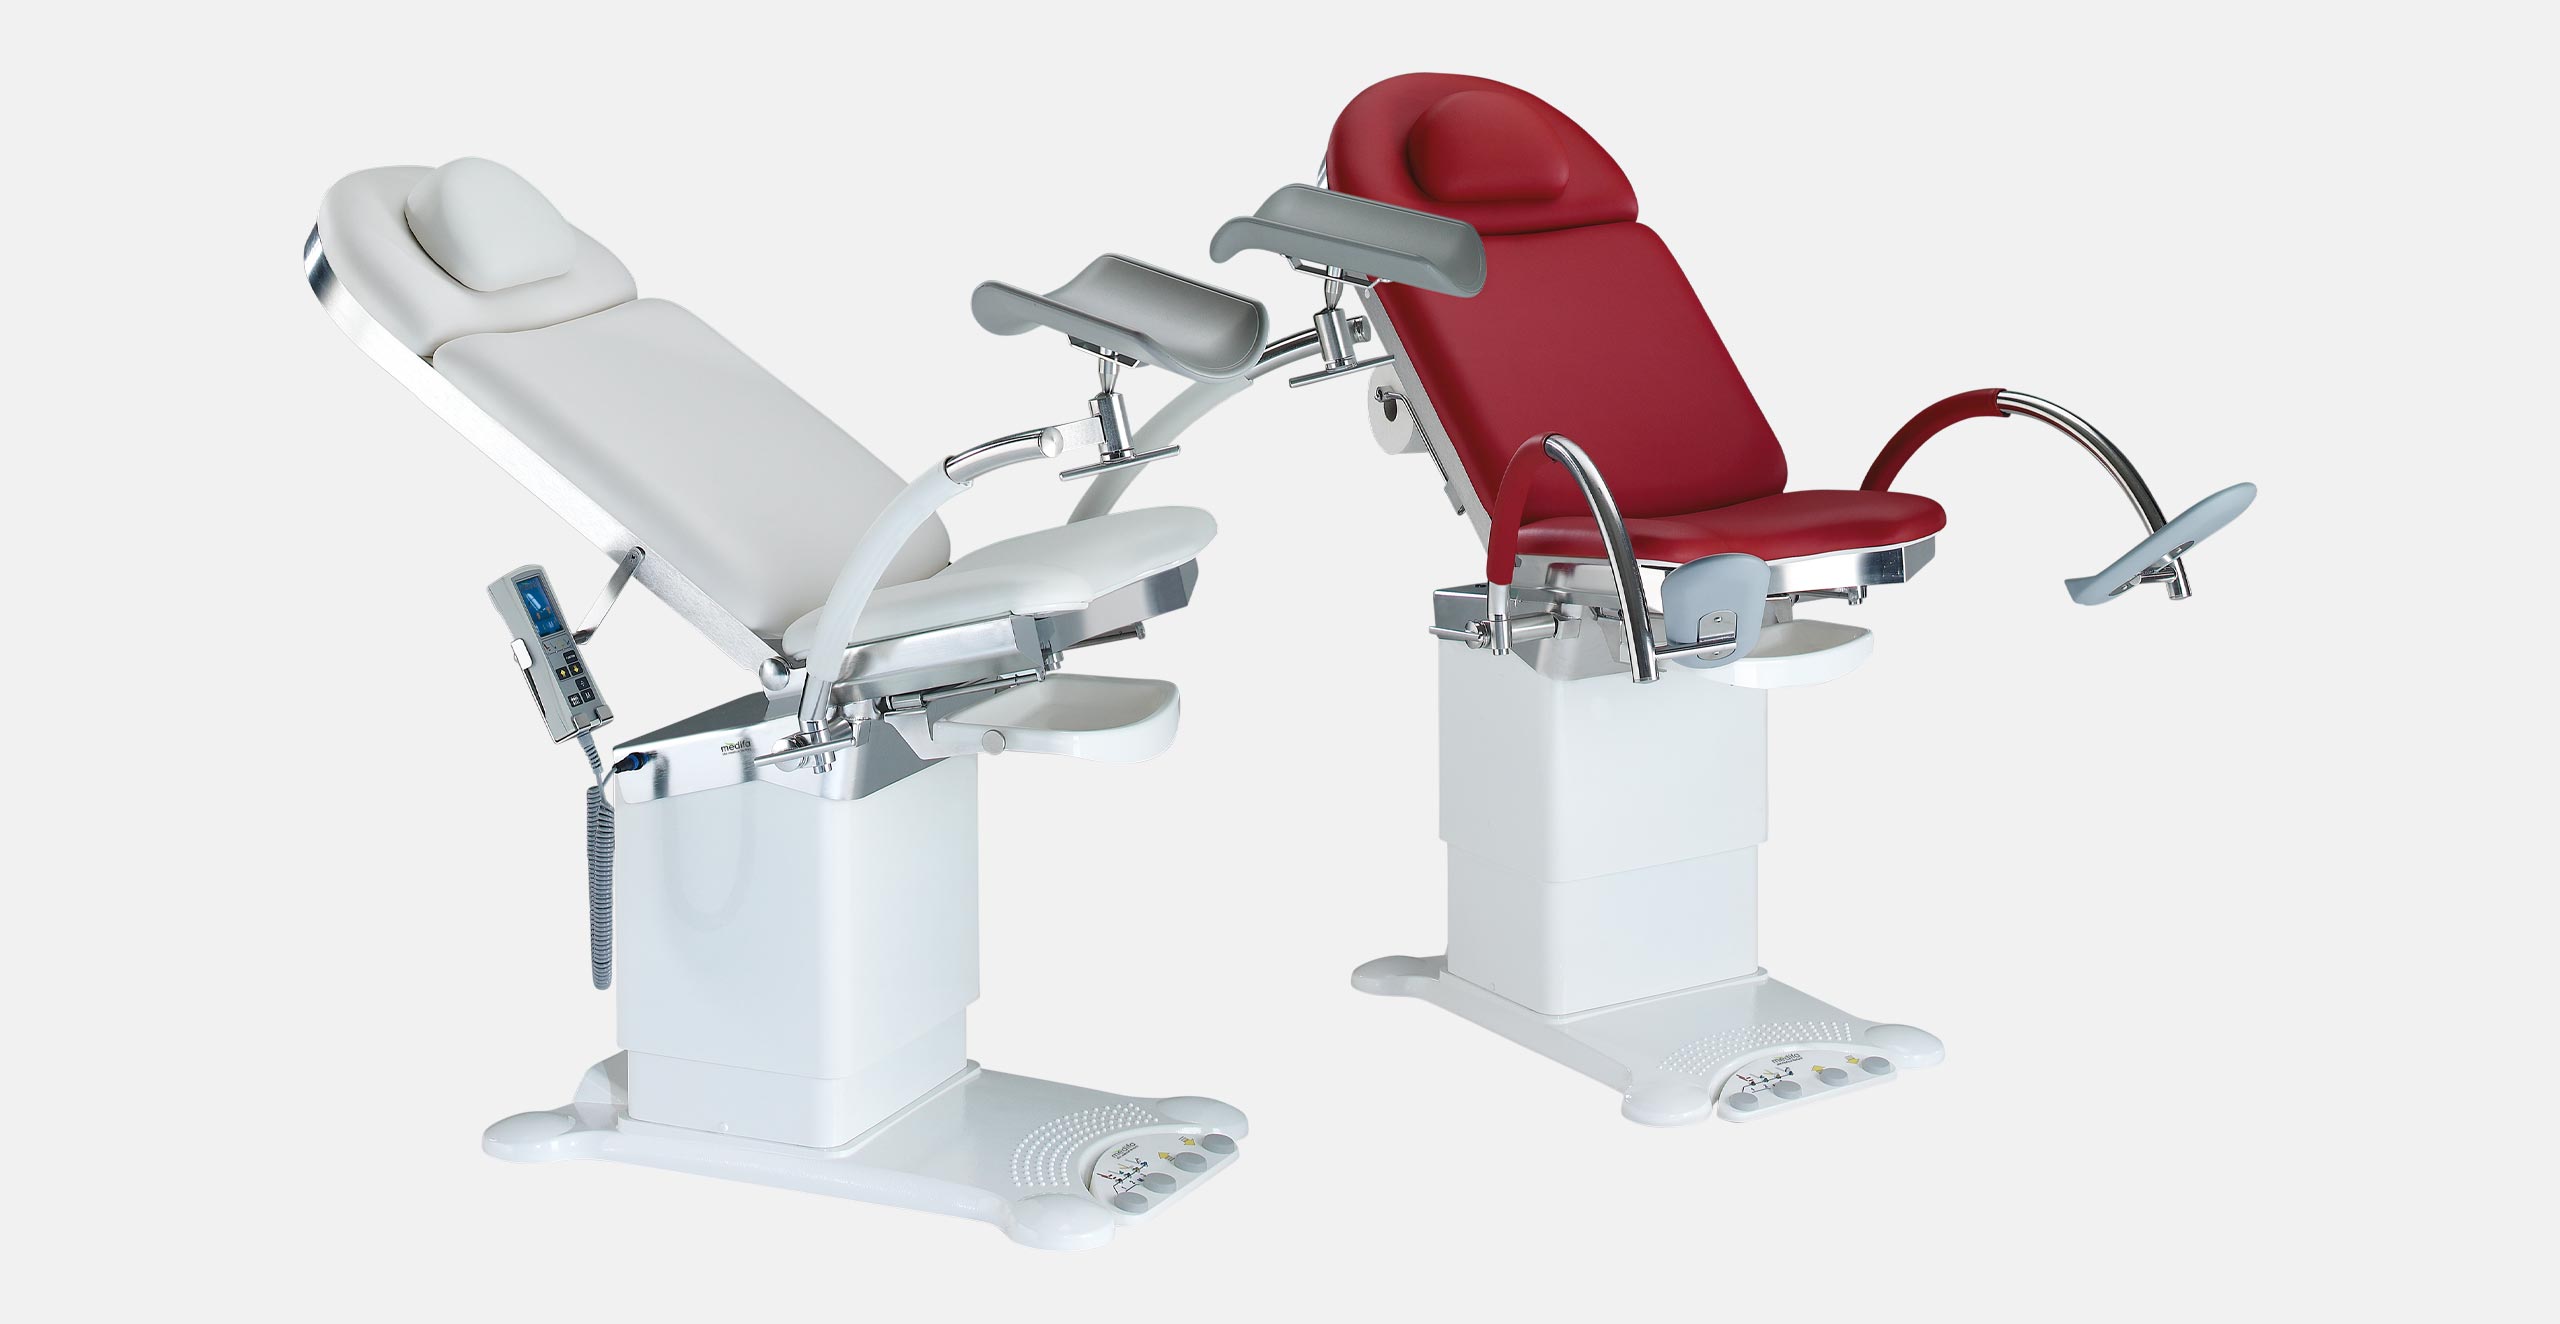 Examination chair for gynecology, urology and proctology